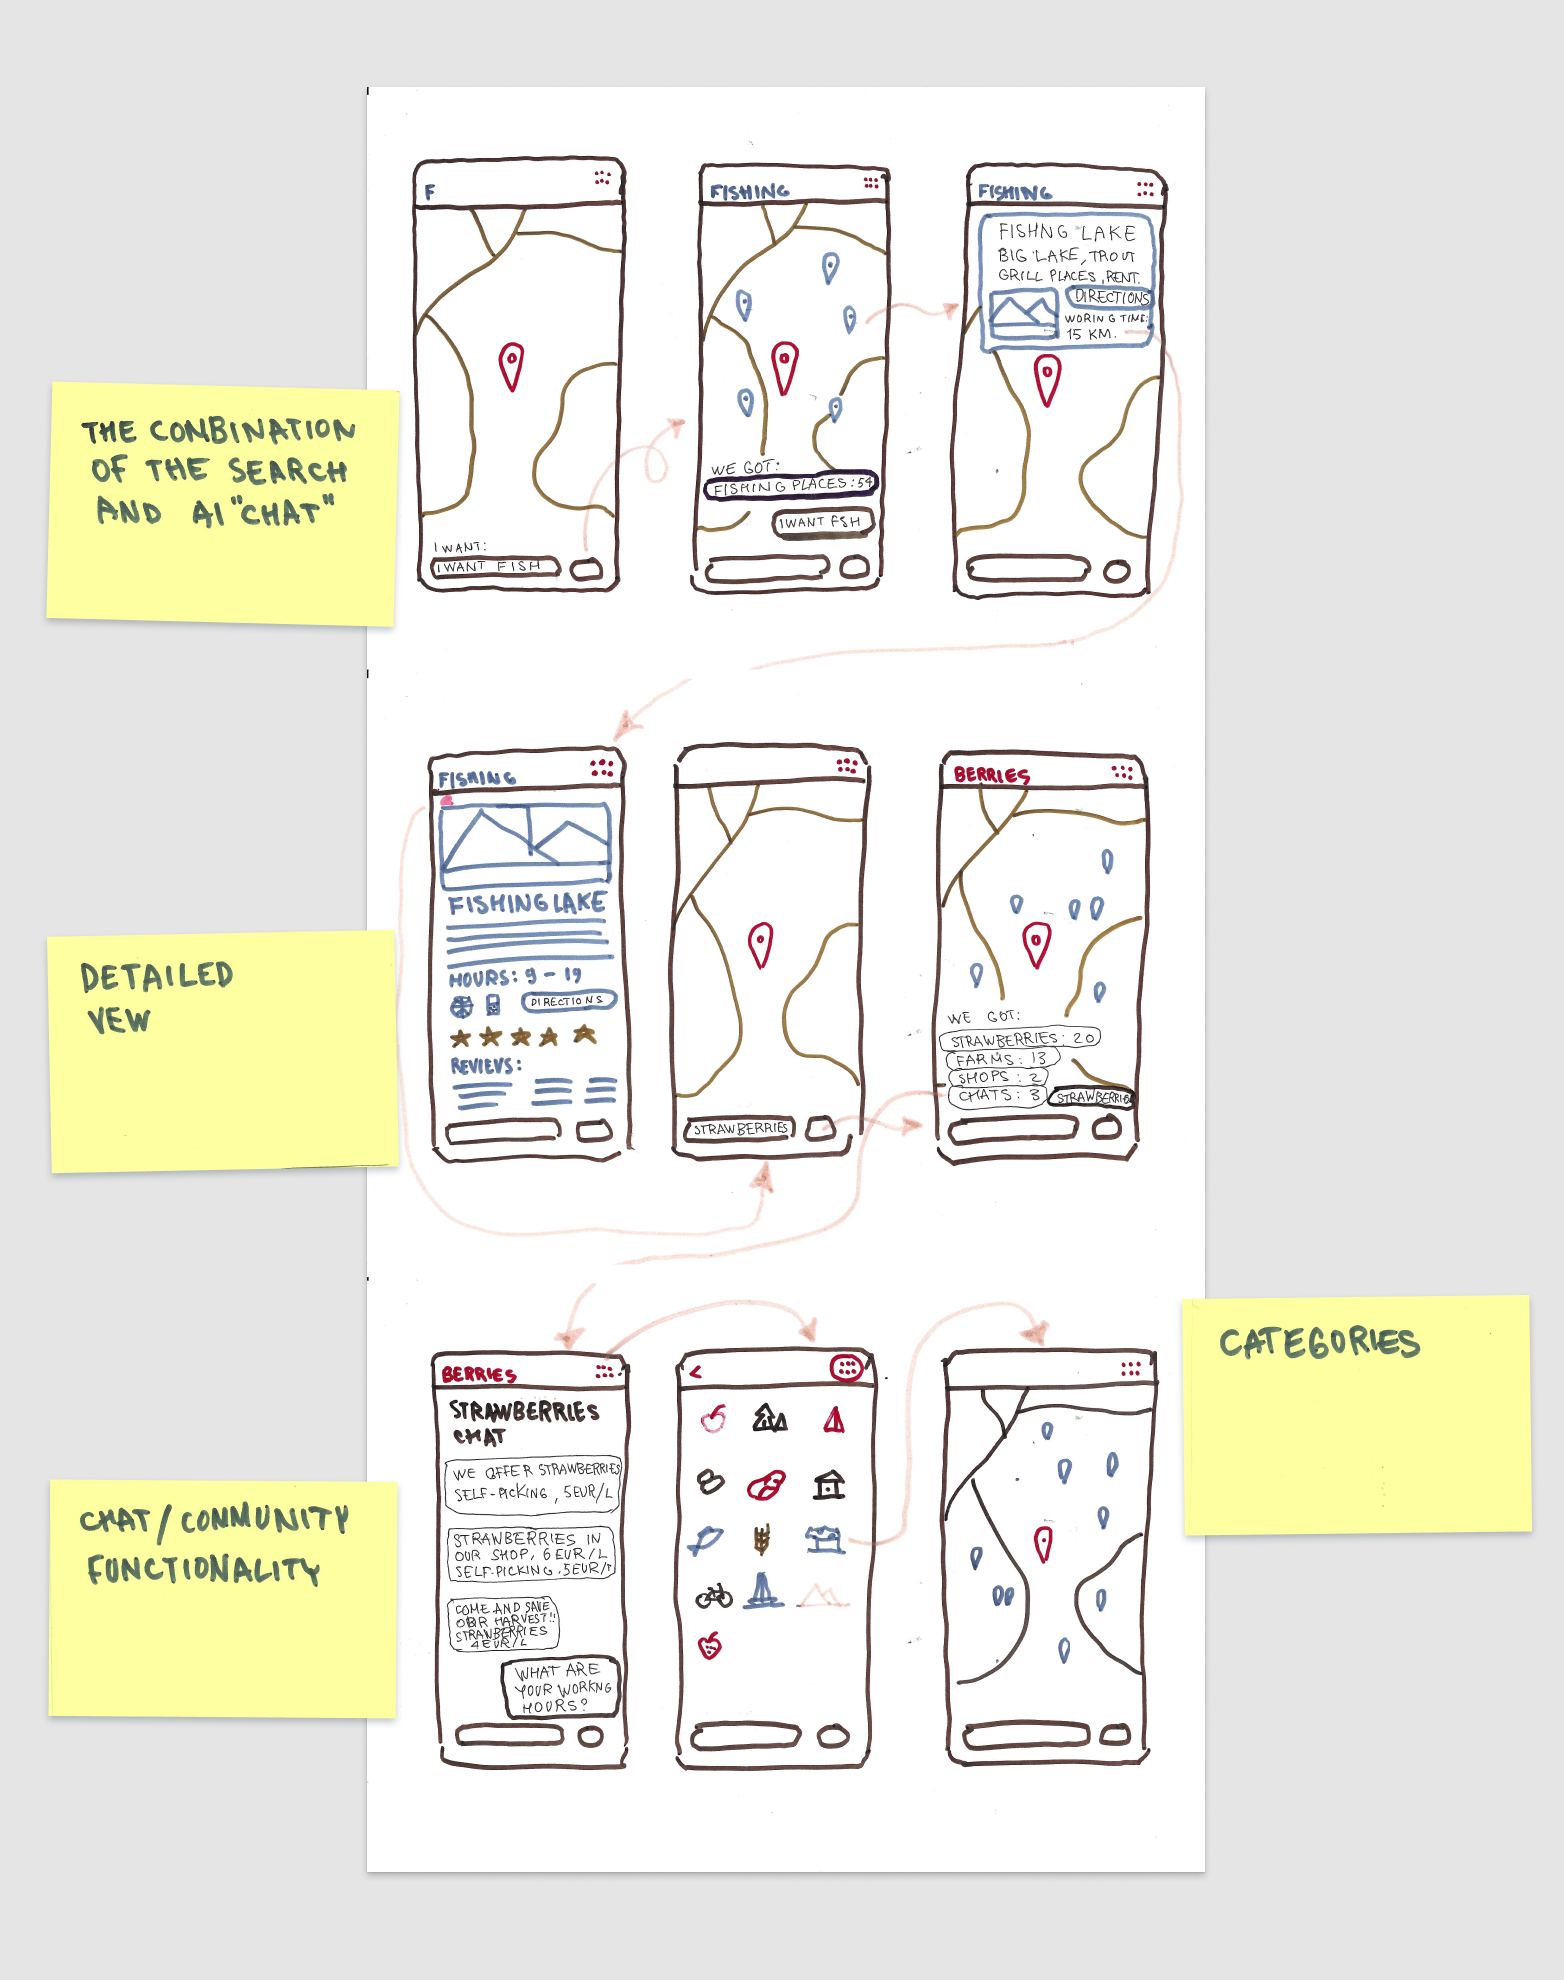 A sketch done during the Design Sprint